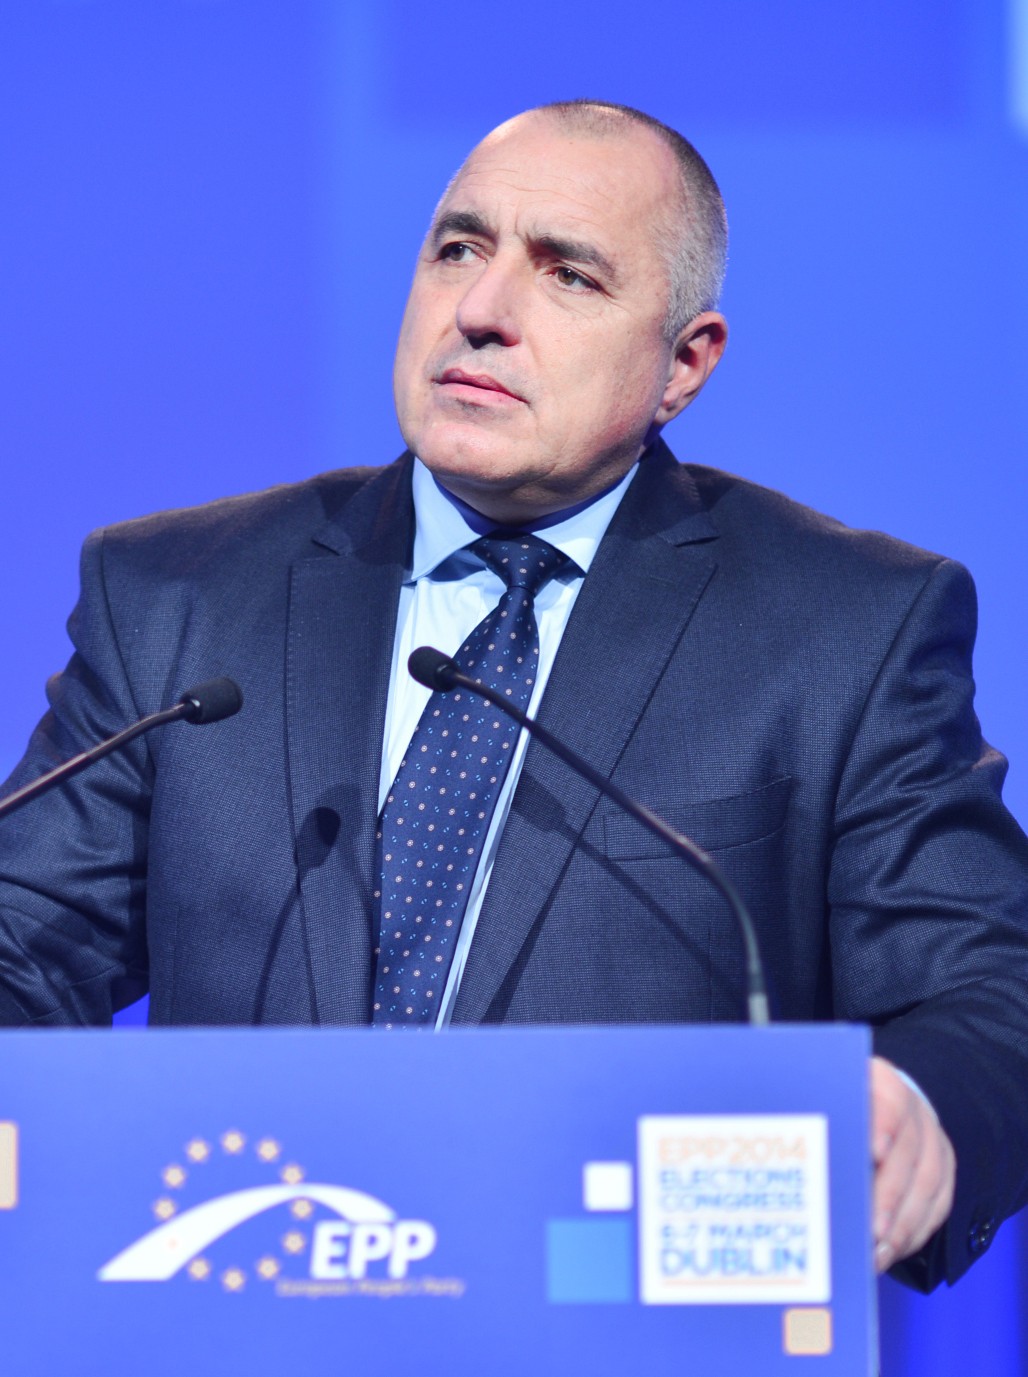 PM Boyko Borissov: EC Must Find A Plan For Countries With Coal Dominated Energy Industries